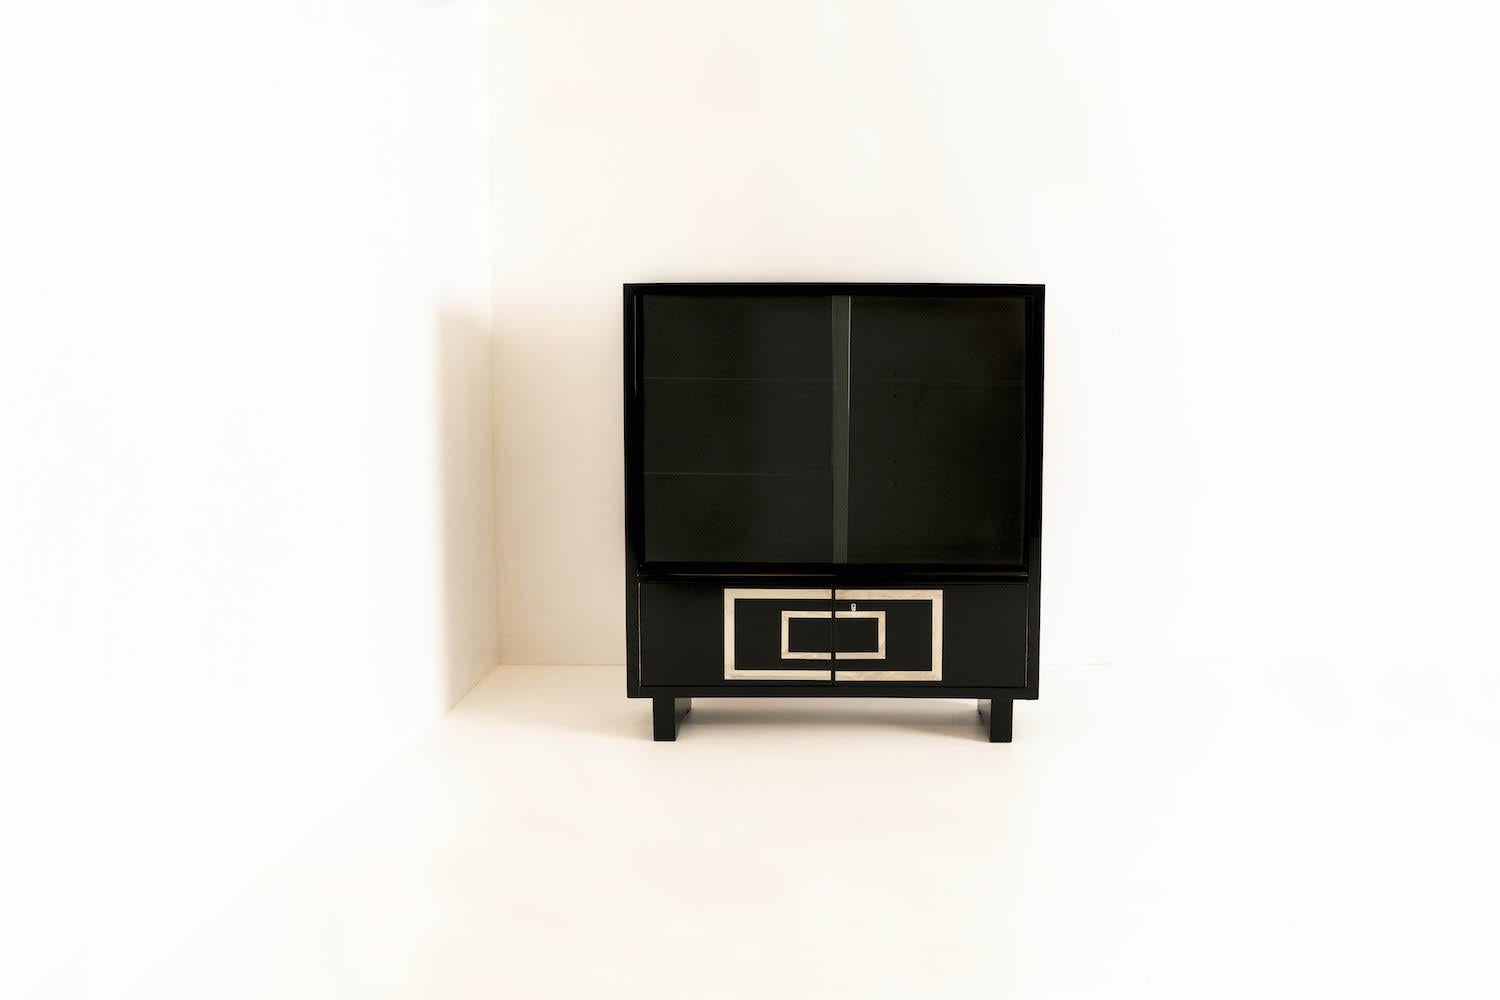 Amazing black lacquered cabinet or bookcase by Bruno Paul for Deutsche Werkstätten Hellerau from Germany 1930s. This amazing piece has a very French Art Deco look and feels, however, is clearly marked with 'Deutsche Werkstätten Hellerau'. It has two